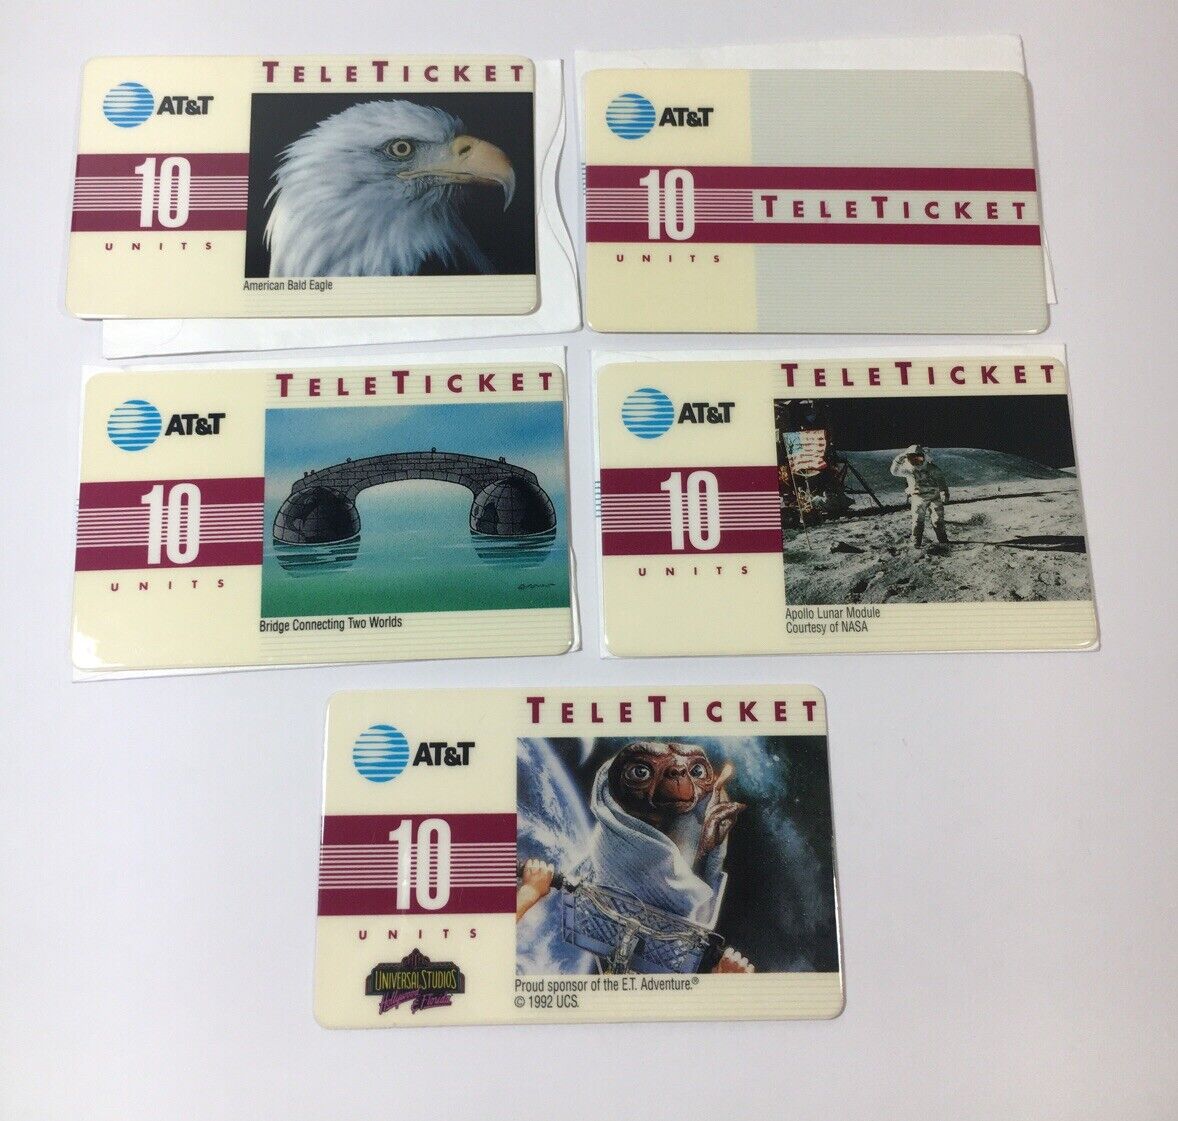 1992 AT&T Teleticket Phone Card Lot Of 5 (7262)